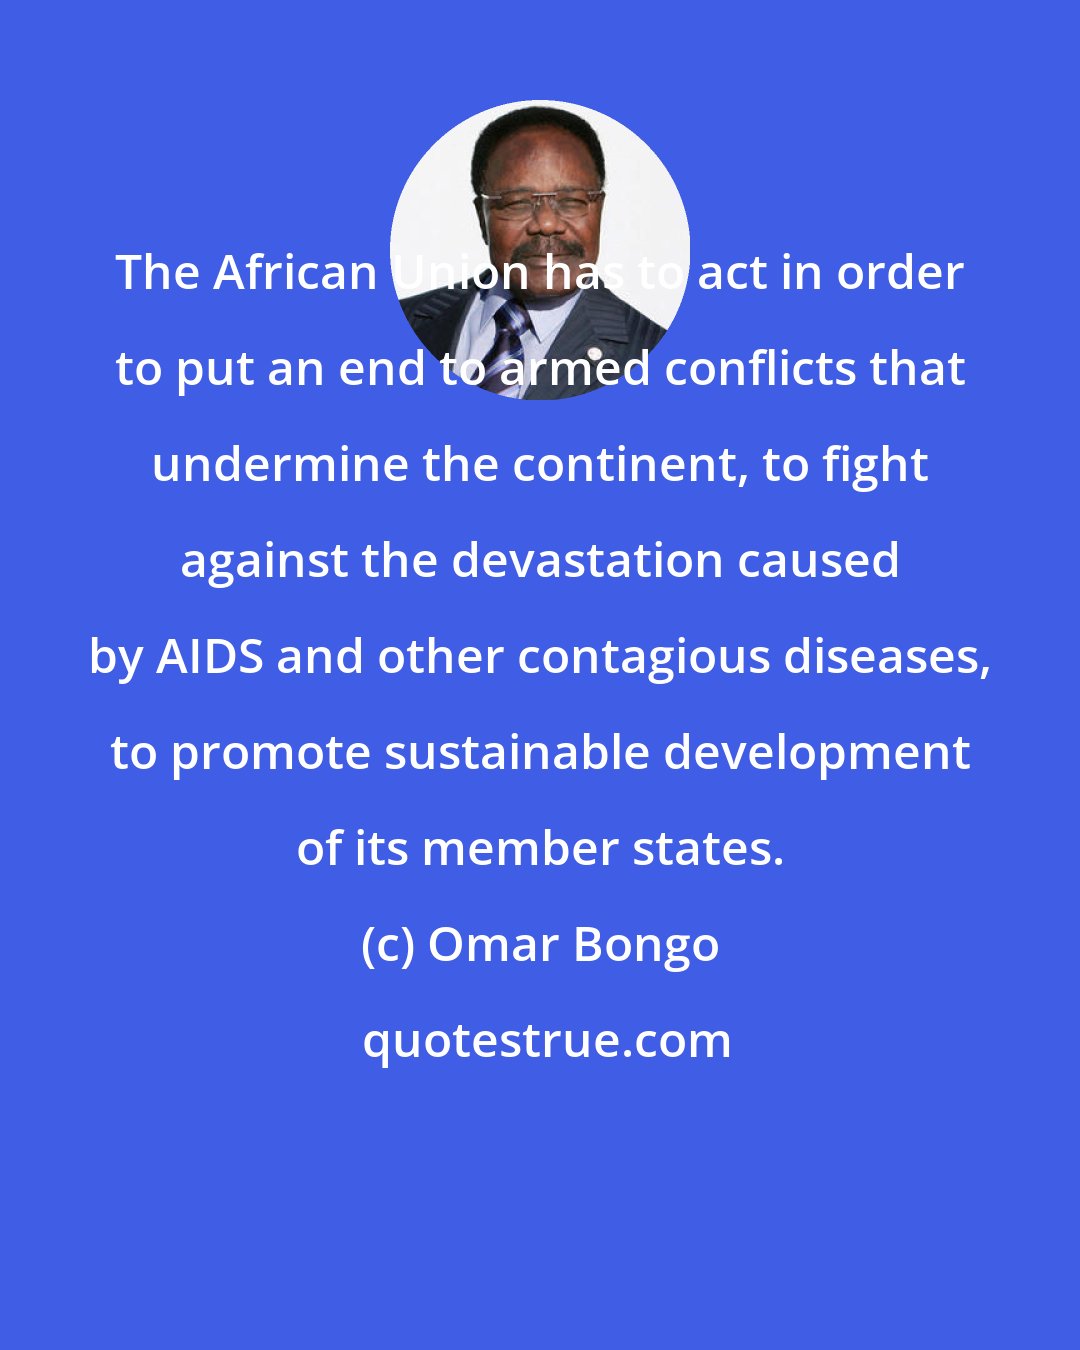 Omar Bongo: The African Union has to act in order to put an end to armed conflicts that undermine the continent, to fight against the devastation caused by AIDS and other contagious diseases, to promote sustainable development of its member states.